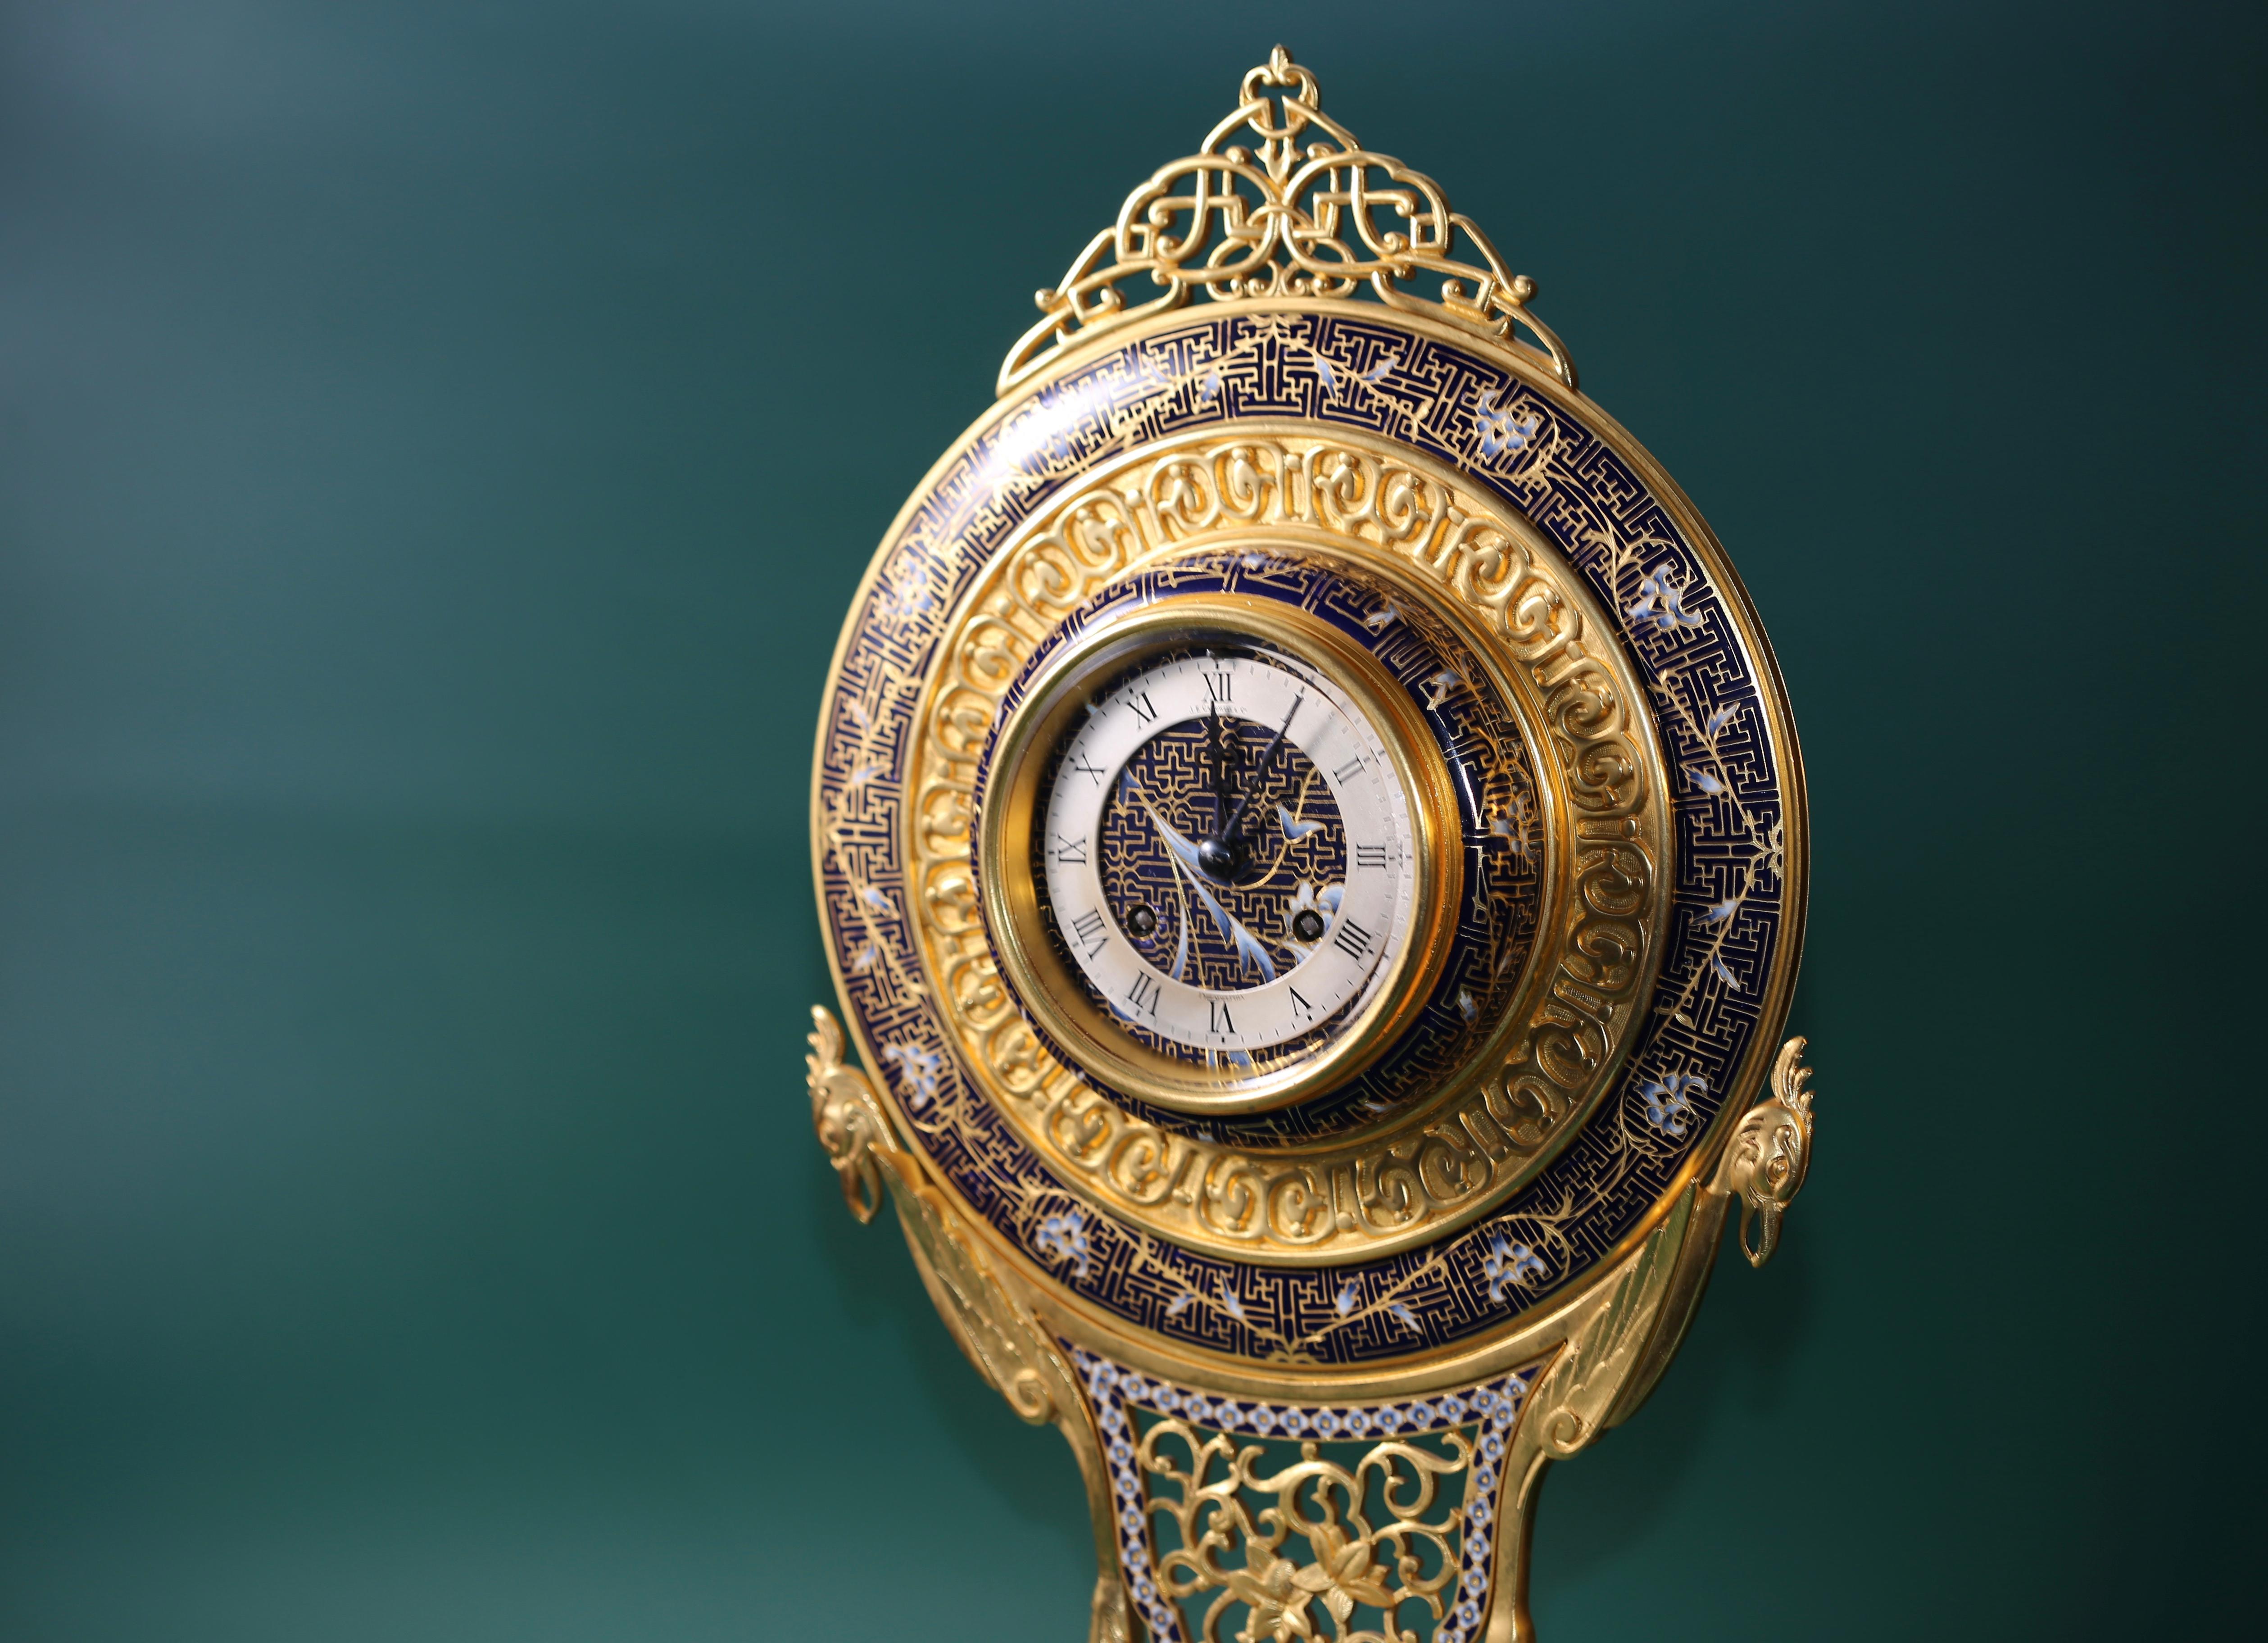 A very fine 19th century American standing clock by J.E Caldwell & Co, made in Philadelphia, USA. This item is of very high artistic merit due to its gilt bronze finishes with Enamel, very rarely combined with oriental buddhism design elements.